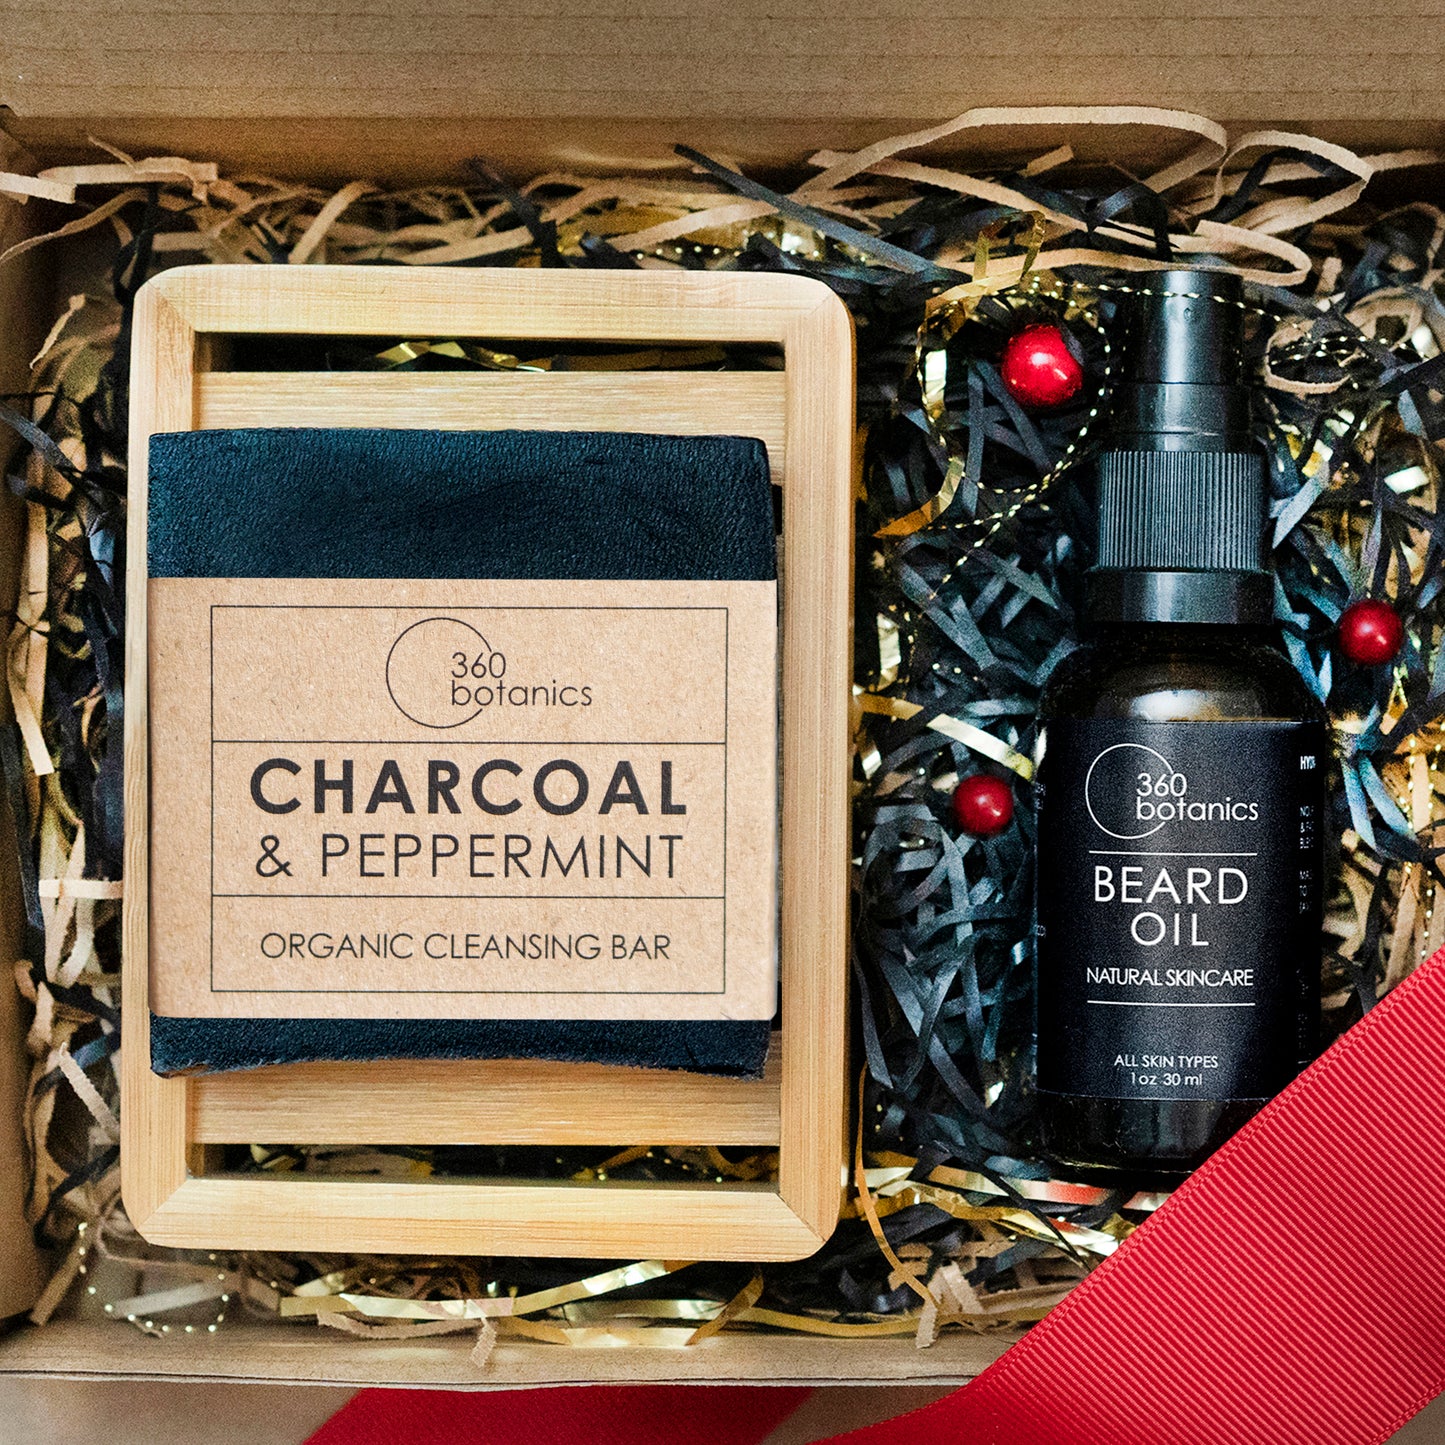 Festive 360 Botanics gift set featuring a Charcoal & Peppermint Organic Cleansing Bar on a bamboo tray, next to a bottle of Beard Oil. The items are nestled in a bed of black and gold crinkle paper with red berry accents, exuding a luxurious and holiday-ready appeal